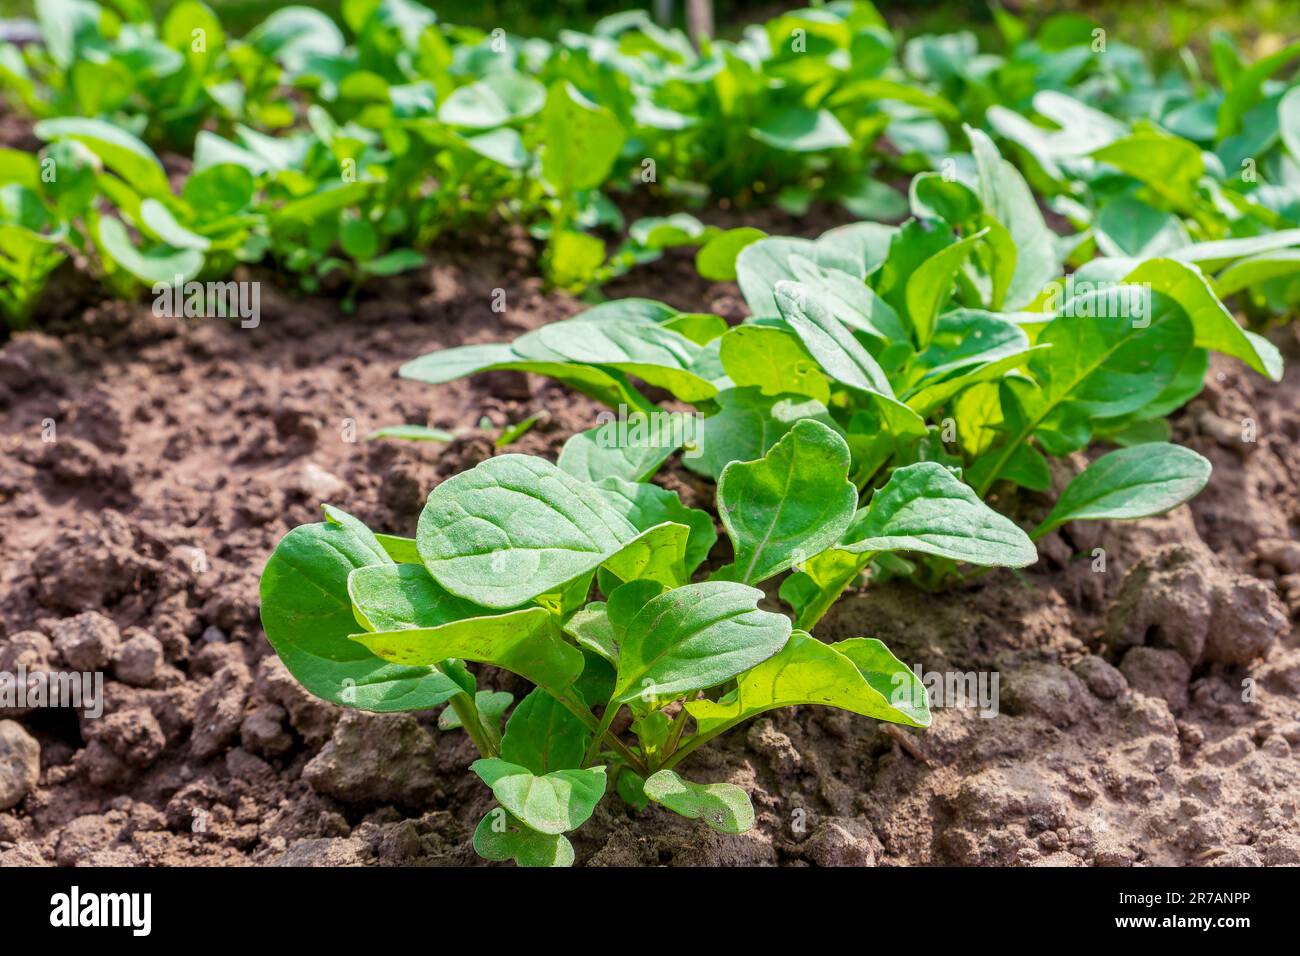 Arugula or rocket (Eruca vesicaria, Eruca sativa Mill., Brassica eruca L.) is an edible annual plant. A close-up view of the plant in the garden Stock Photo